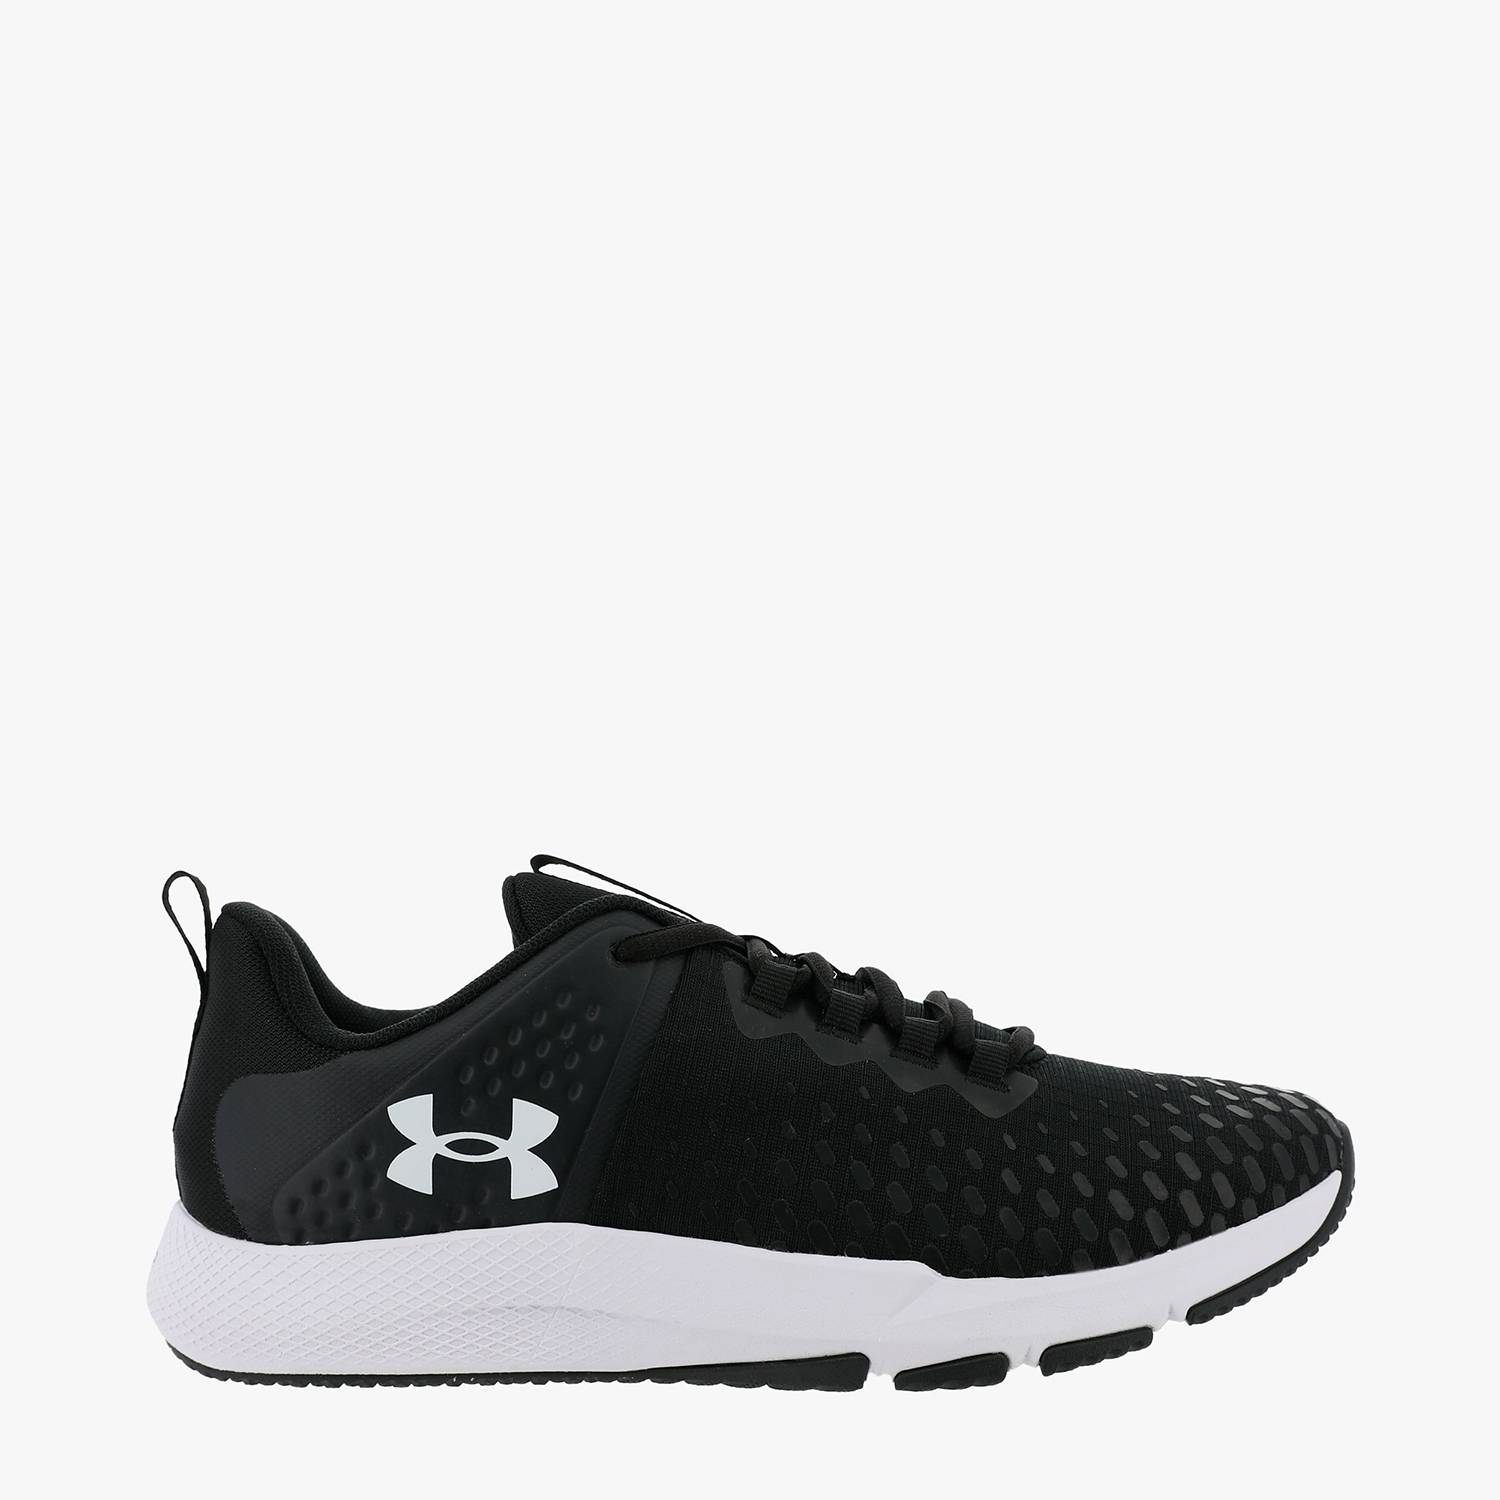 ZAPATILLAS UNDER ARMOUR CHARGED ADVANCE LAM TRAINING NGO/GRS